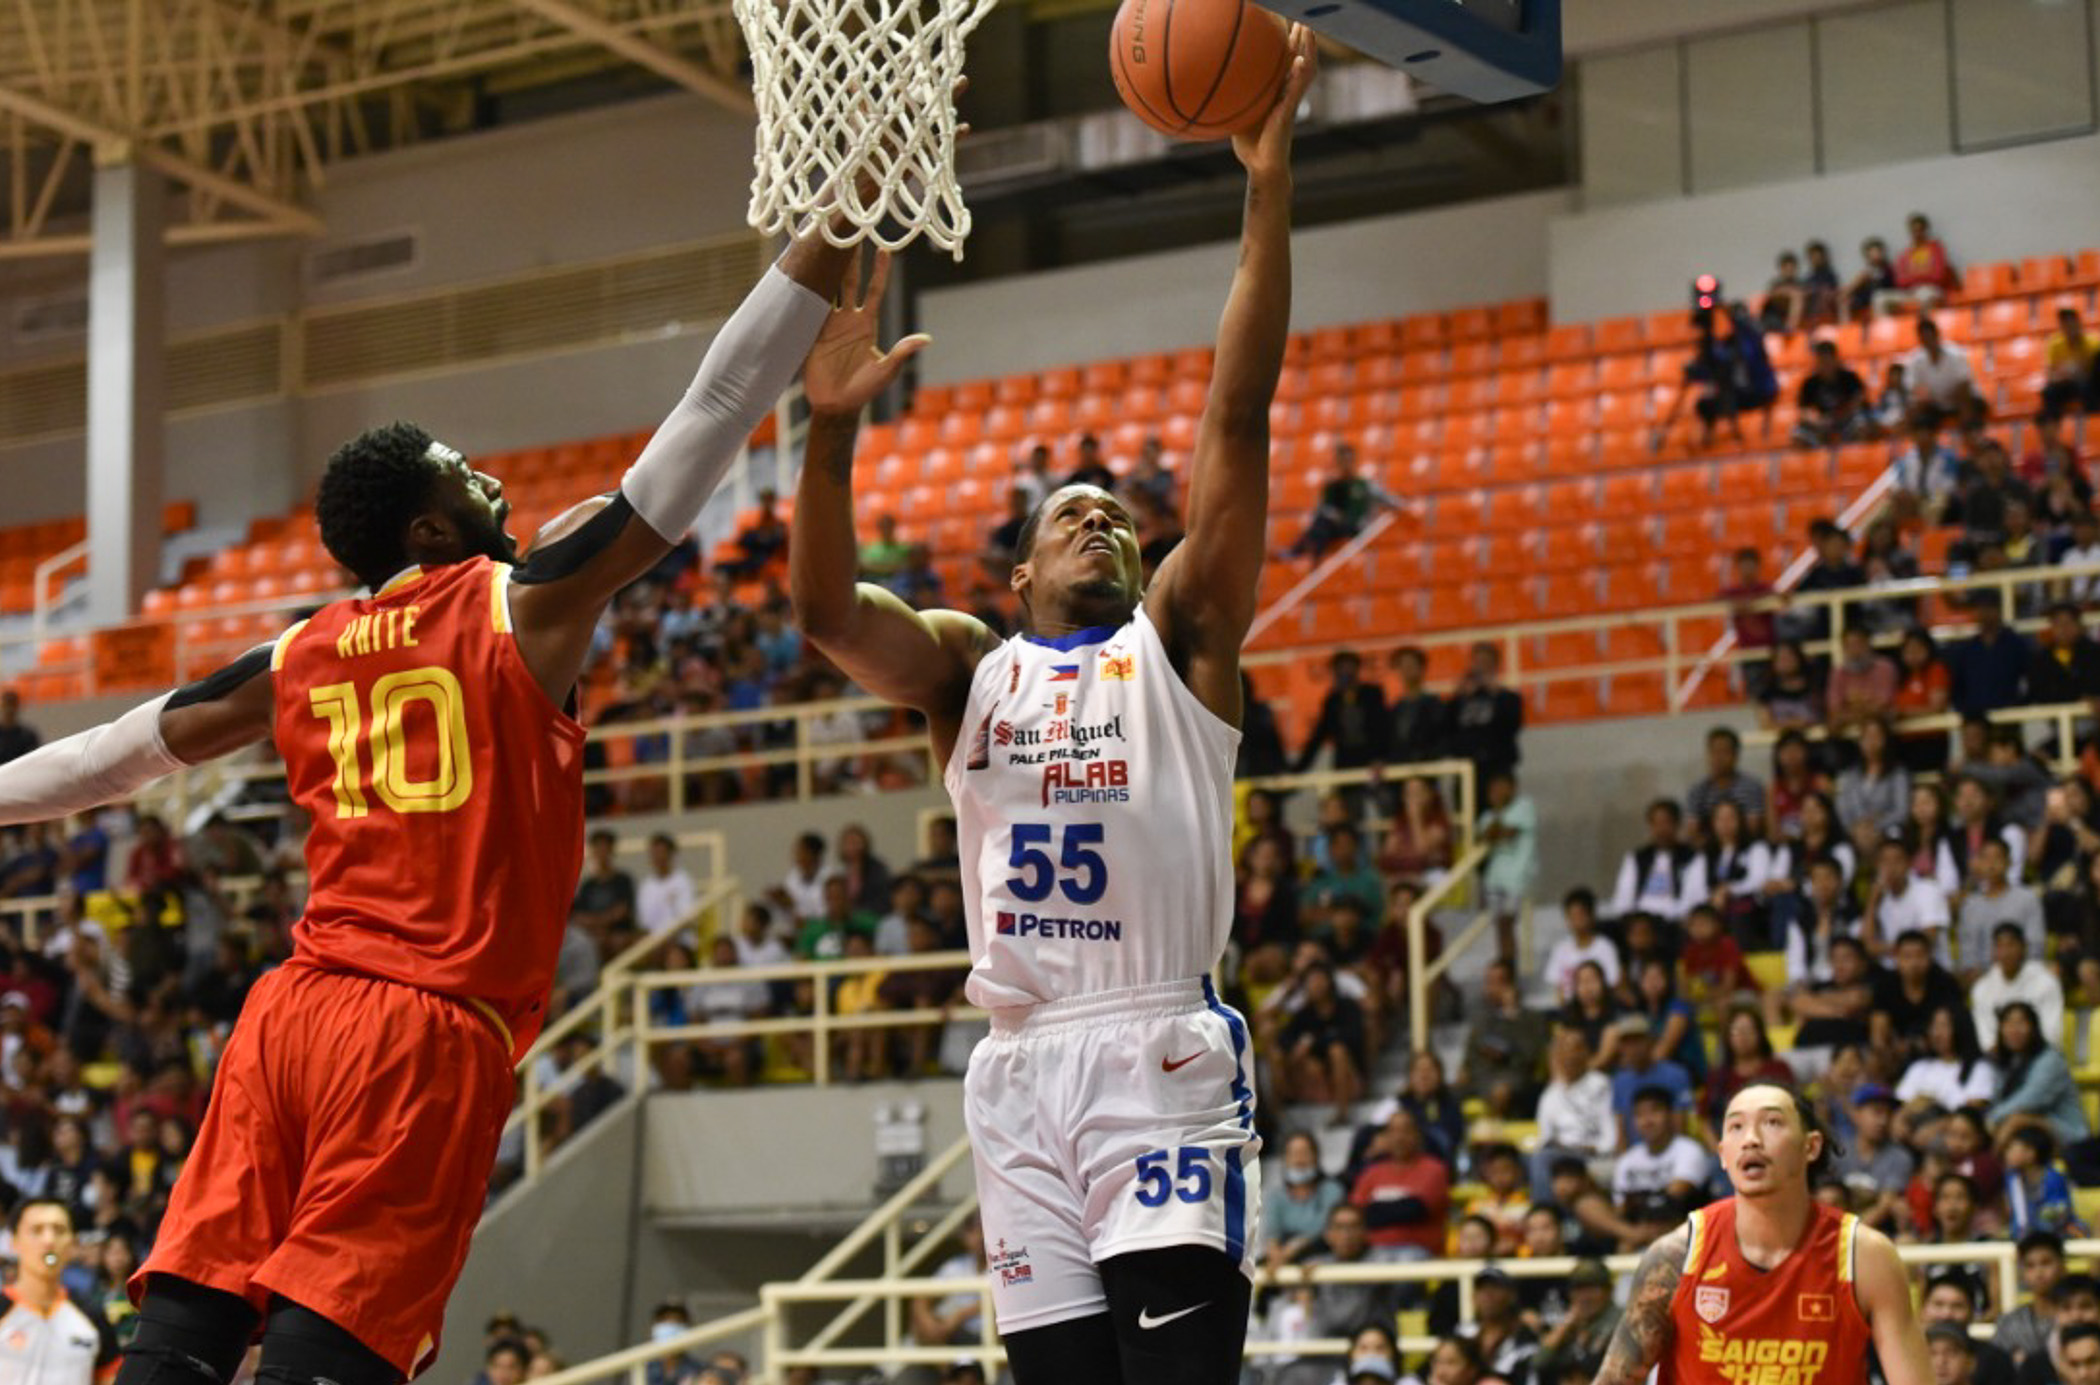 Alab survives Saigon’s late surge for bounce back win